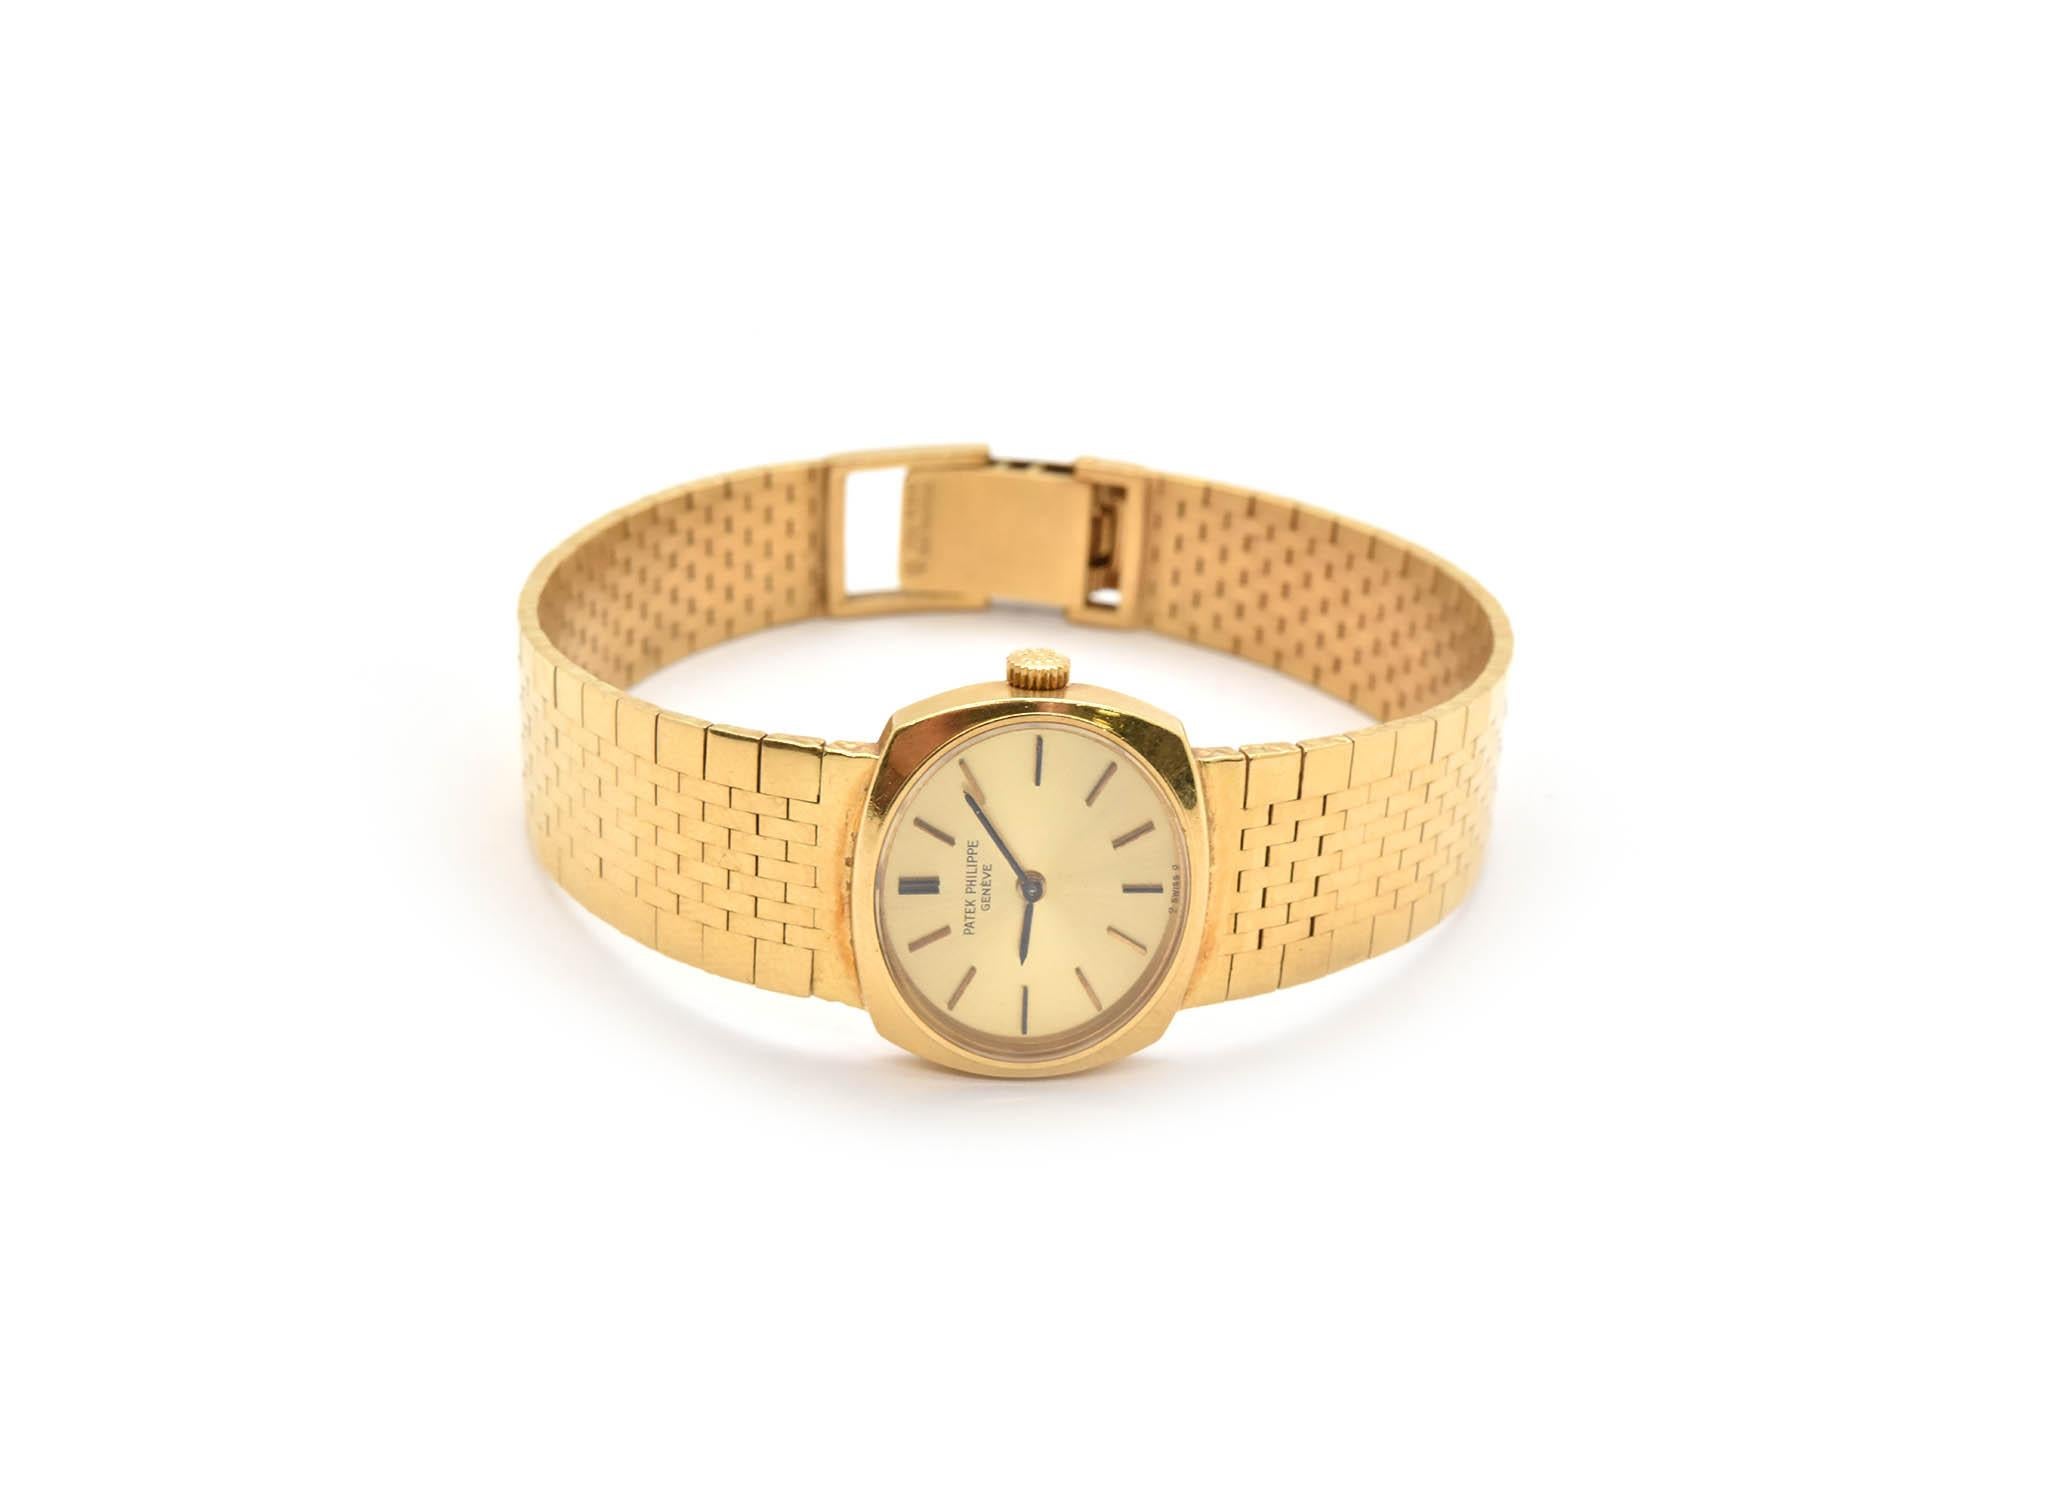 Movement: 20 jewel manual wind movement
Function: hours, minutes
Case: 23mm 18k yellow gold case, sapphire crystal
Band: 18k yellow gold bracelet, fits up to a 7-inch wrist
Dial: champagne dial, black hands, gold hour markers
Reference #: